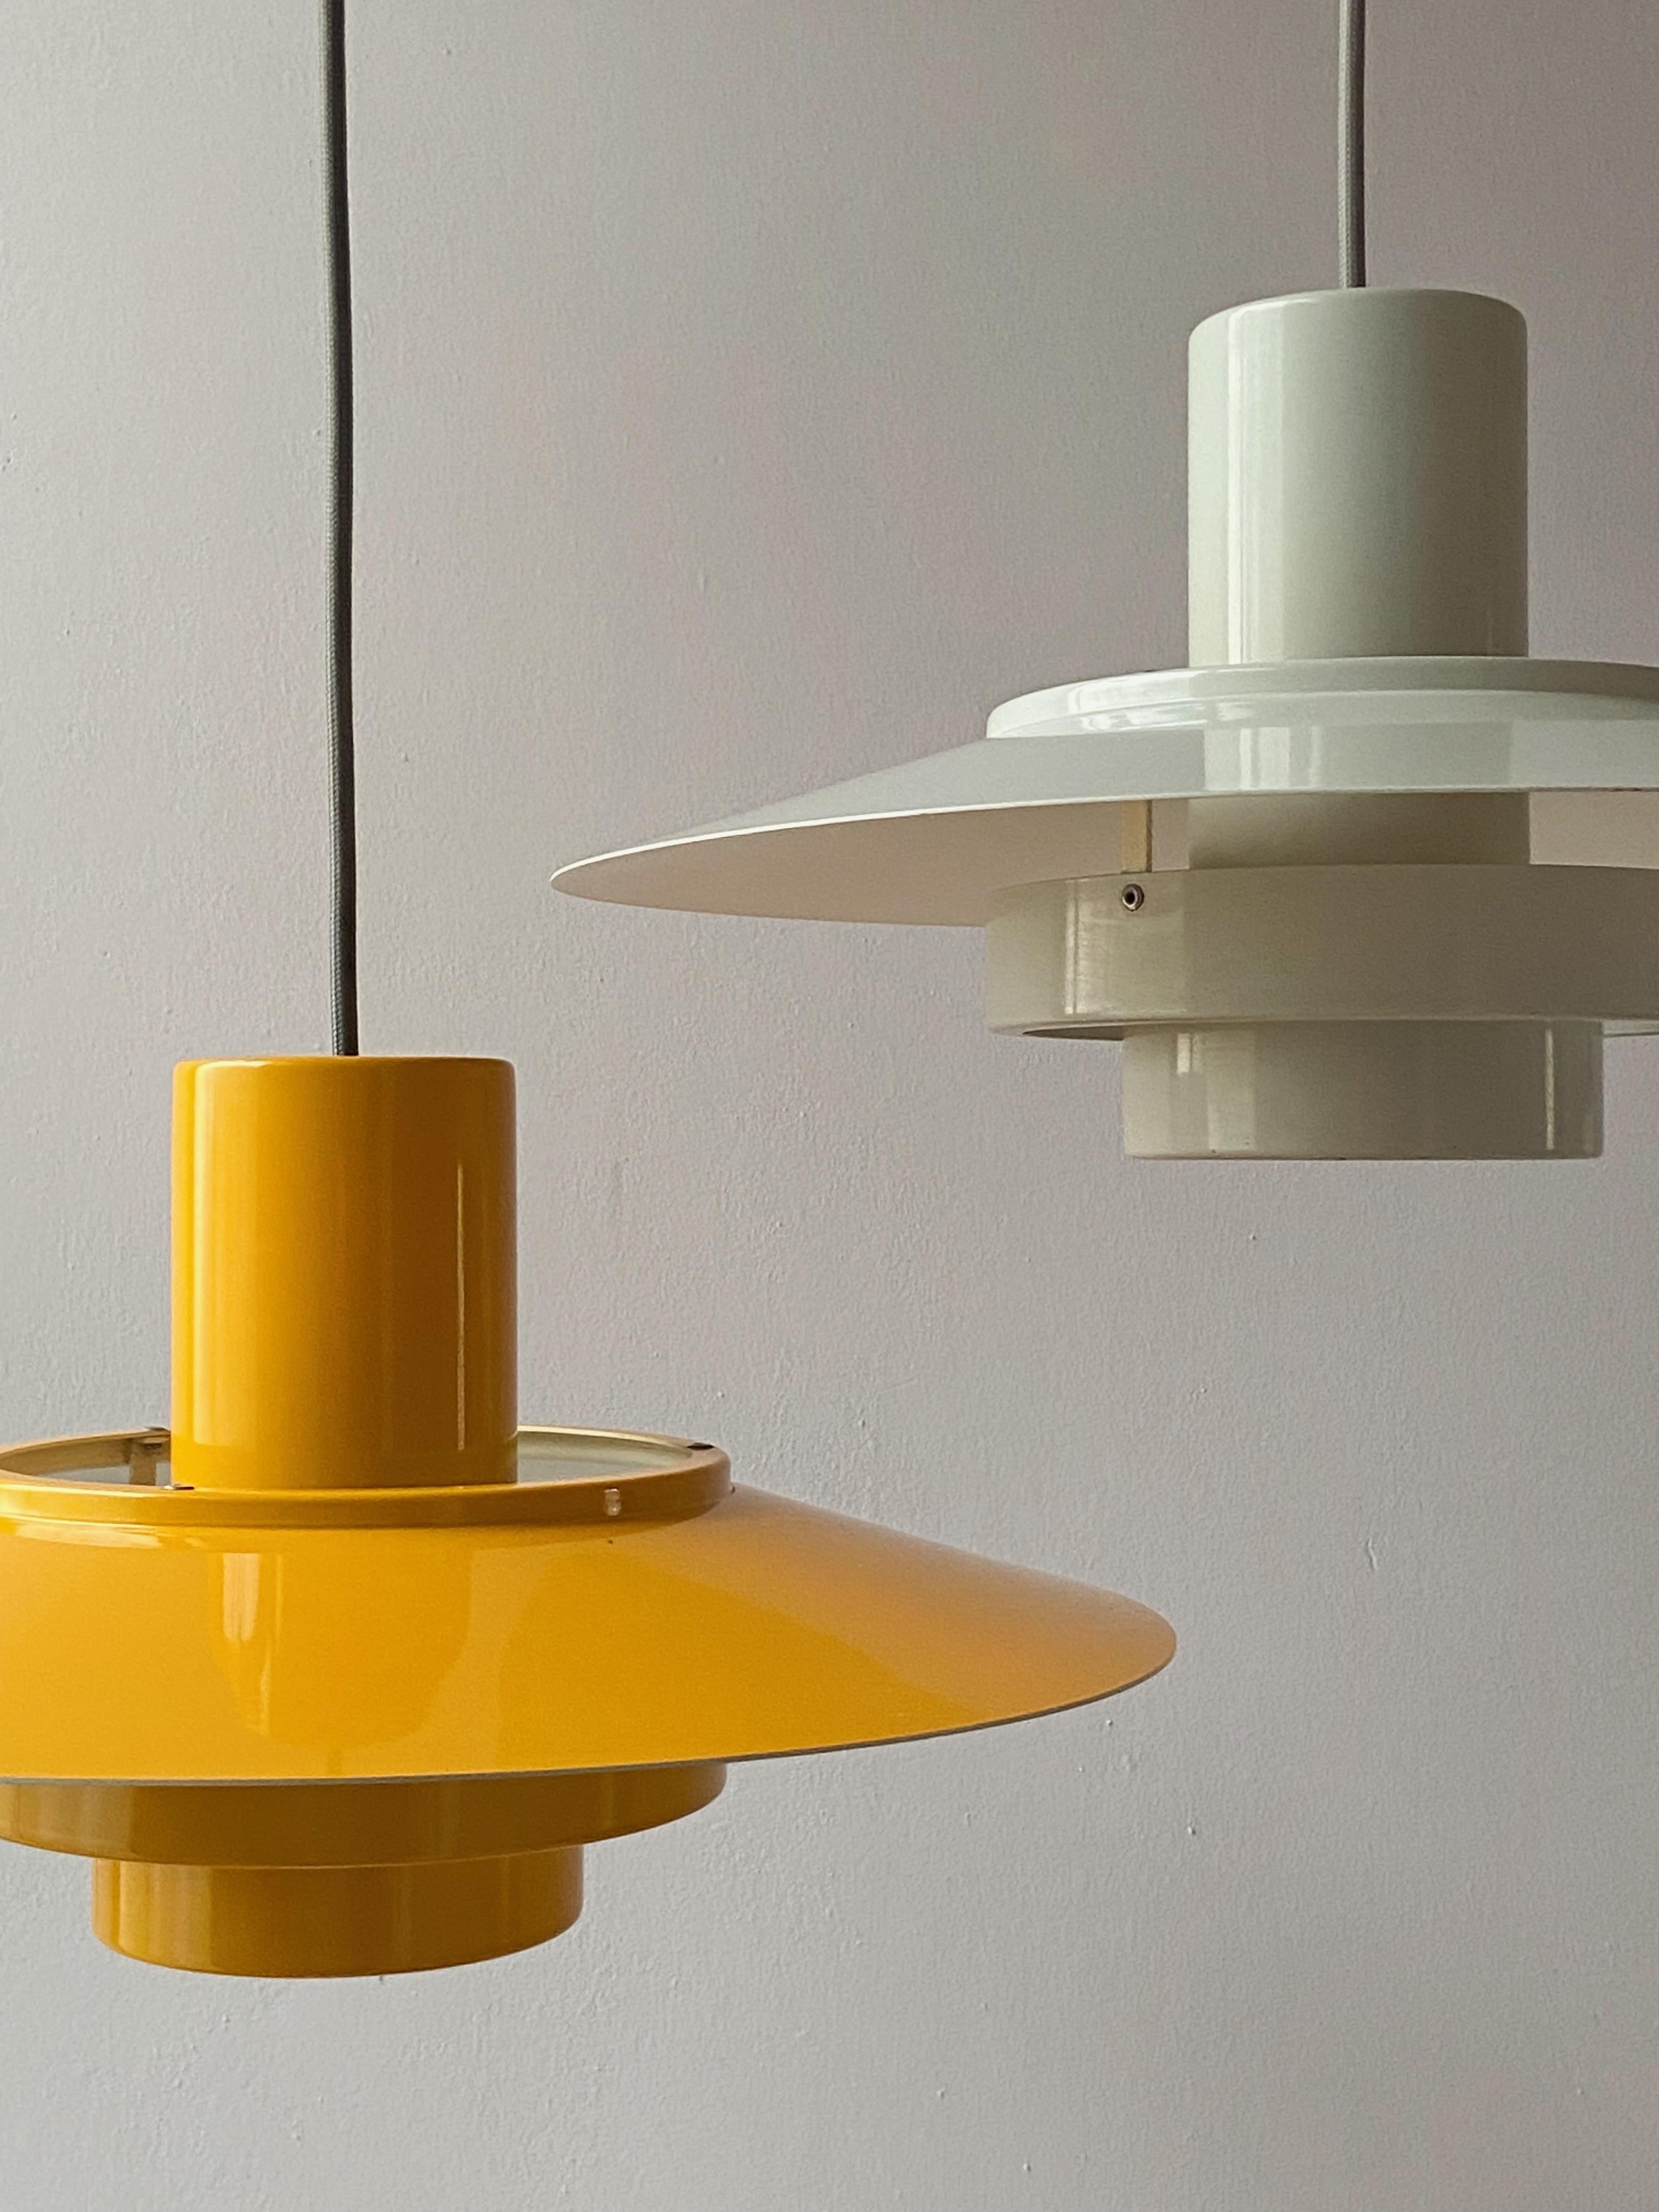 Very nice yellow pendant lamp design Andreas Hansen in 1968 produced by Fog & Mørup, Made in Denmark. The lamp is in good condition. No parts missing, with new grey fabric electric cord. 
With 1x E27 Edison screw sockets ready to use with 110 and